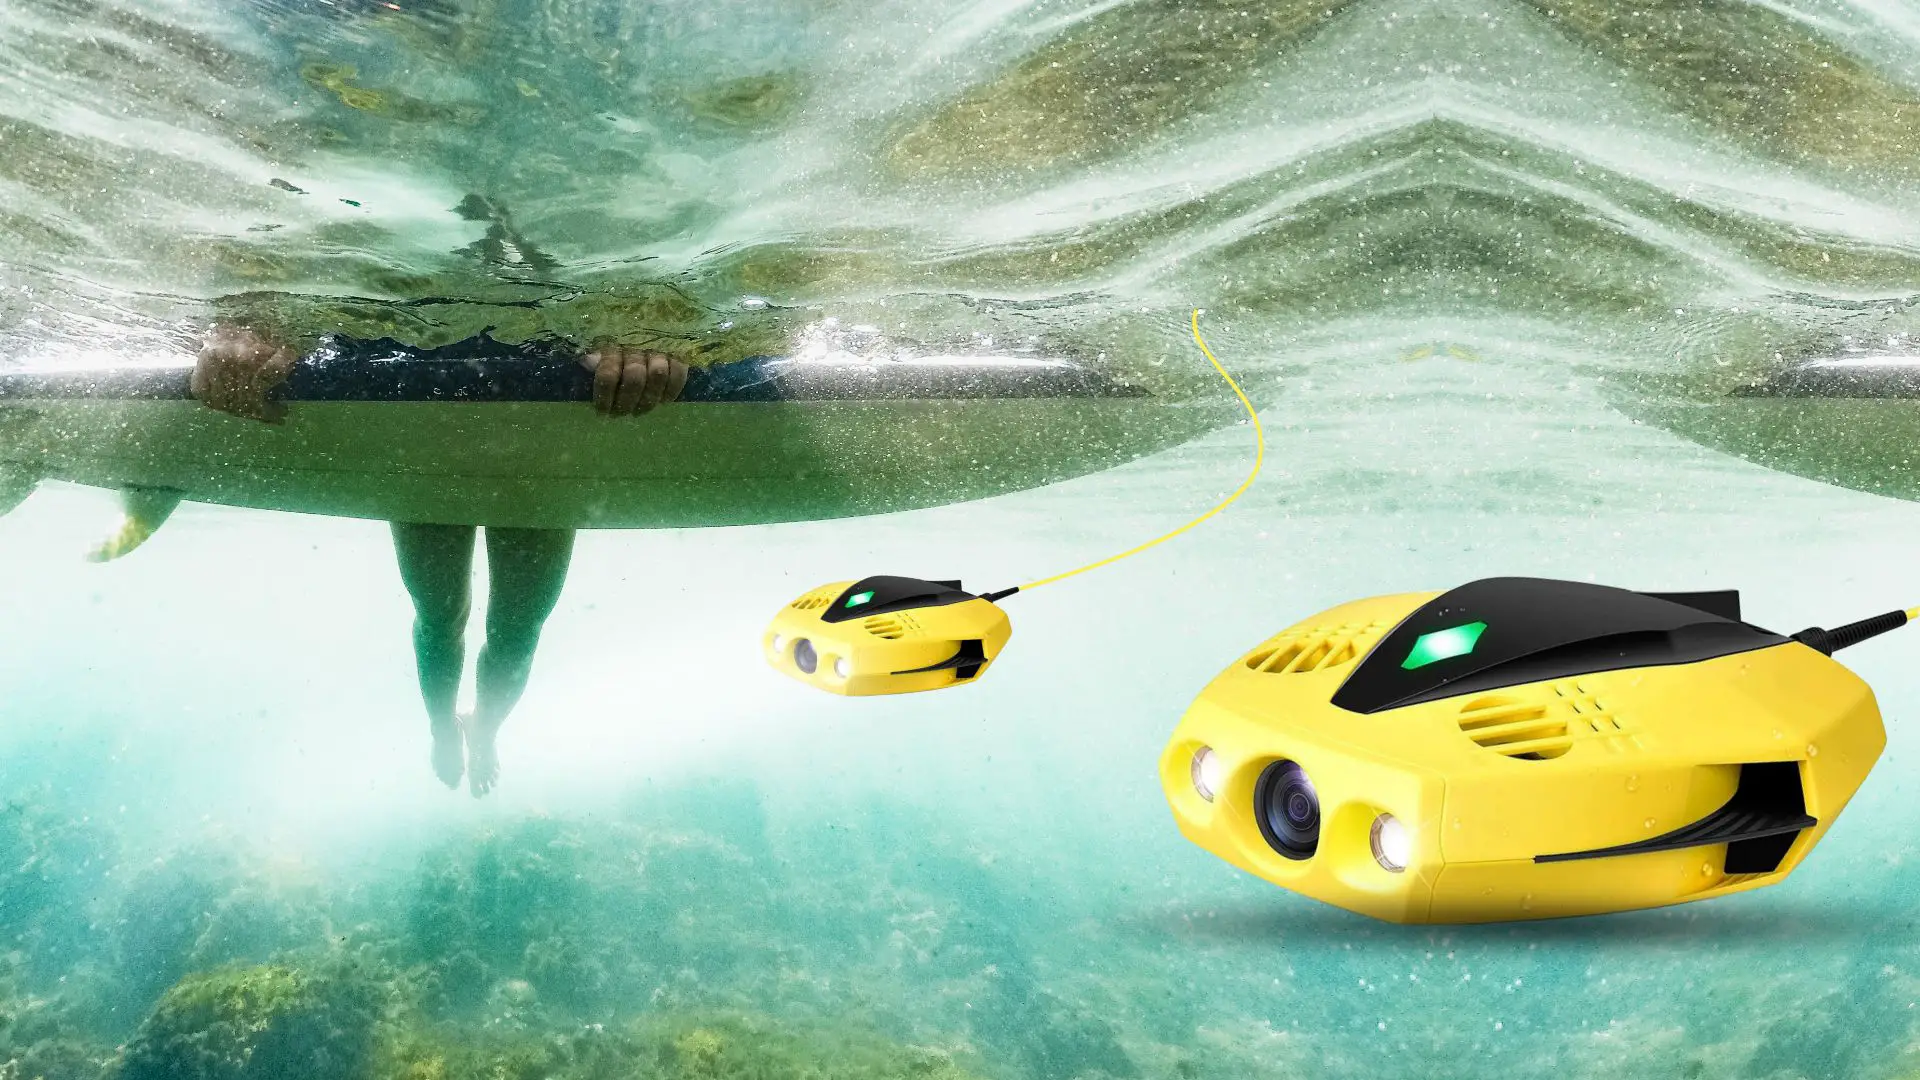 CHASING Dory Underwater Drone